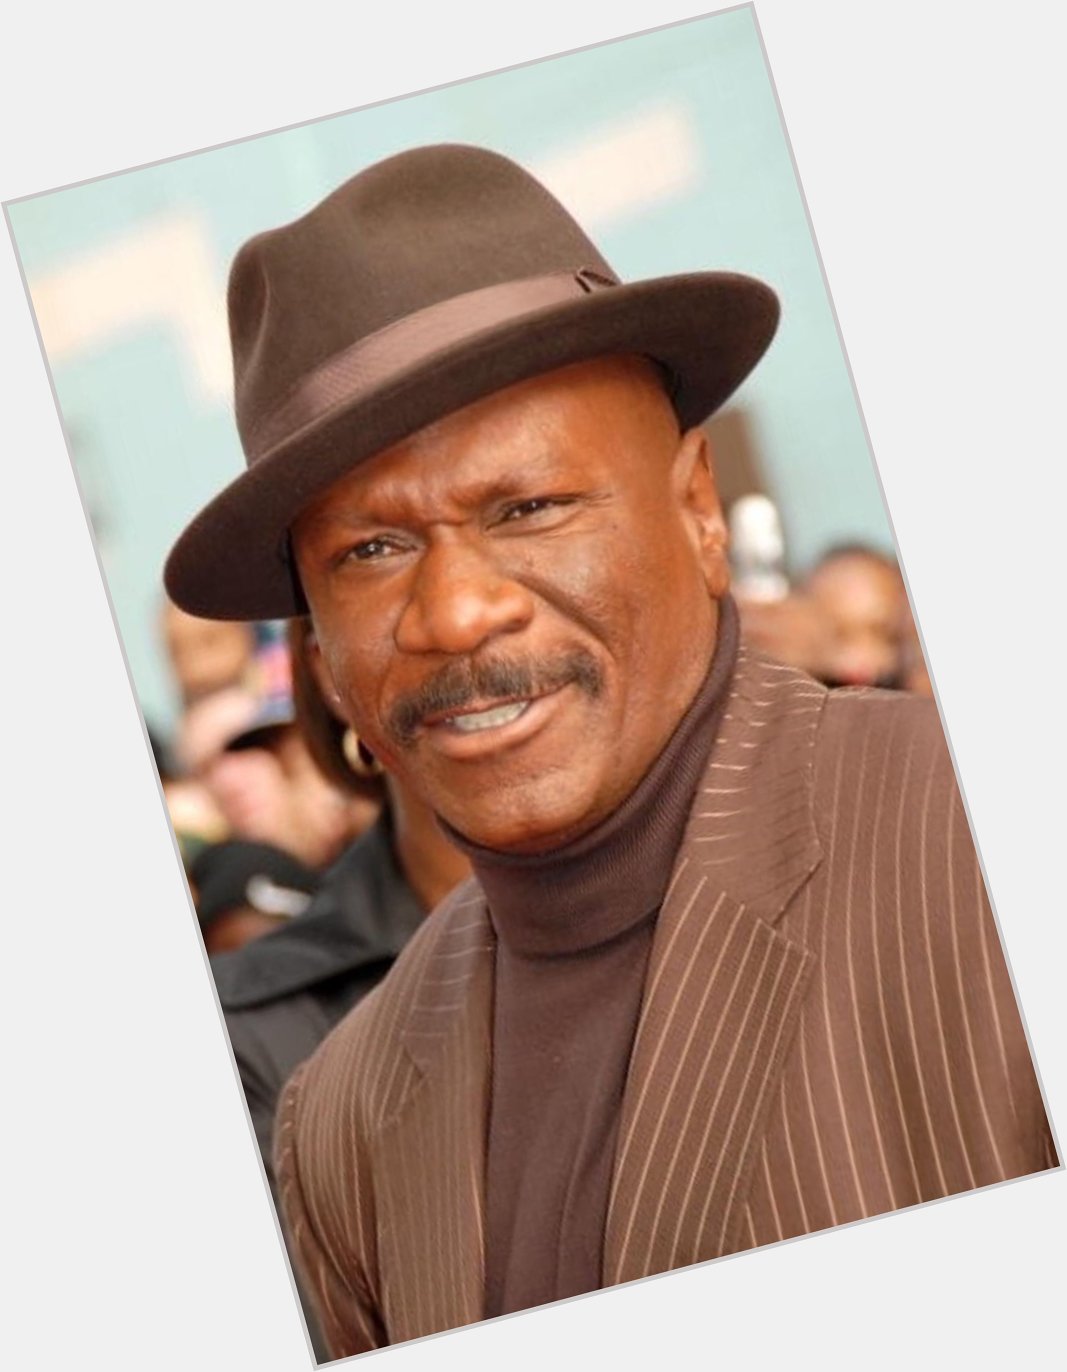 Ving Rhames was born May 12, 1959 and turns 64 today. Happy Birthday Mr. Arby s  